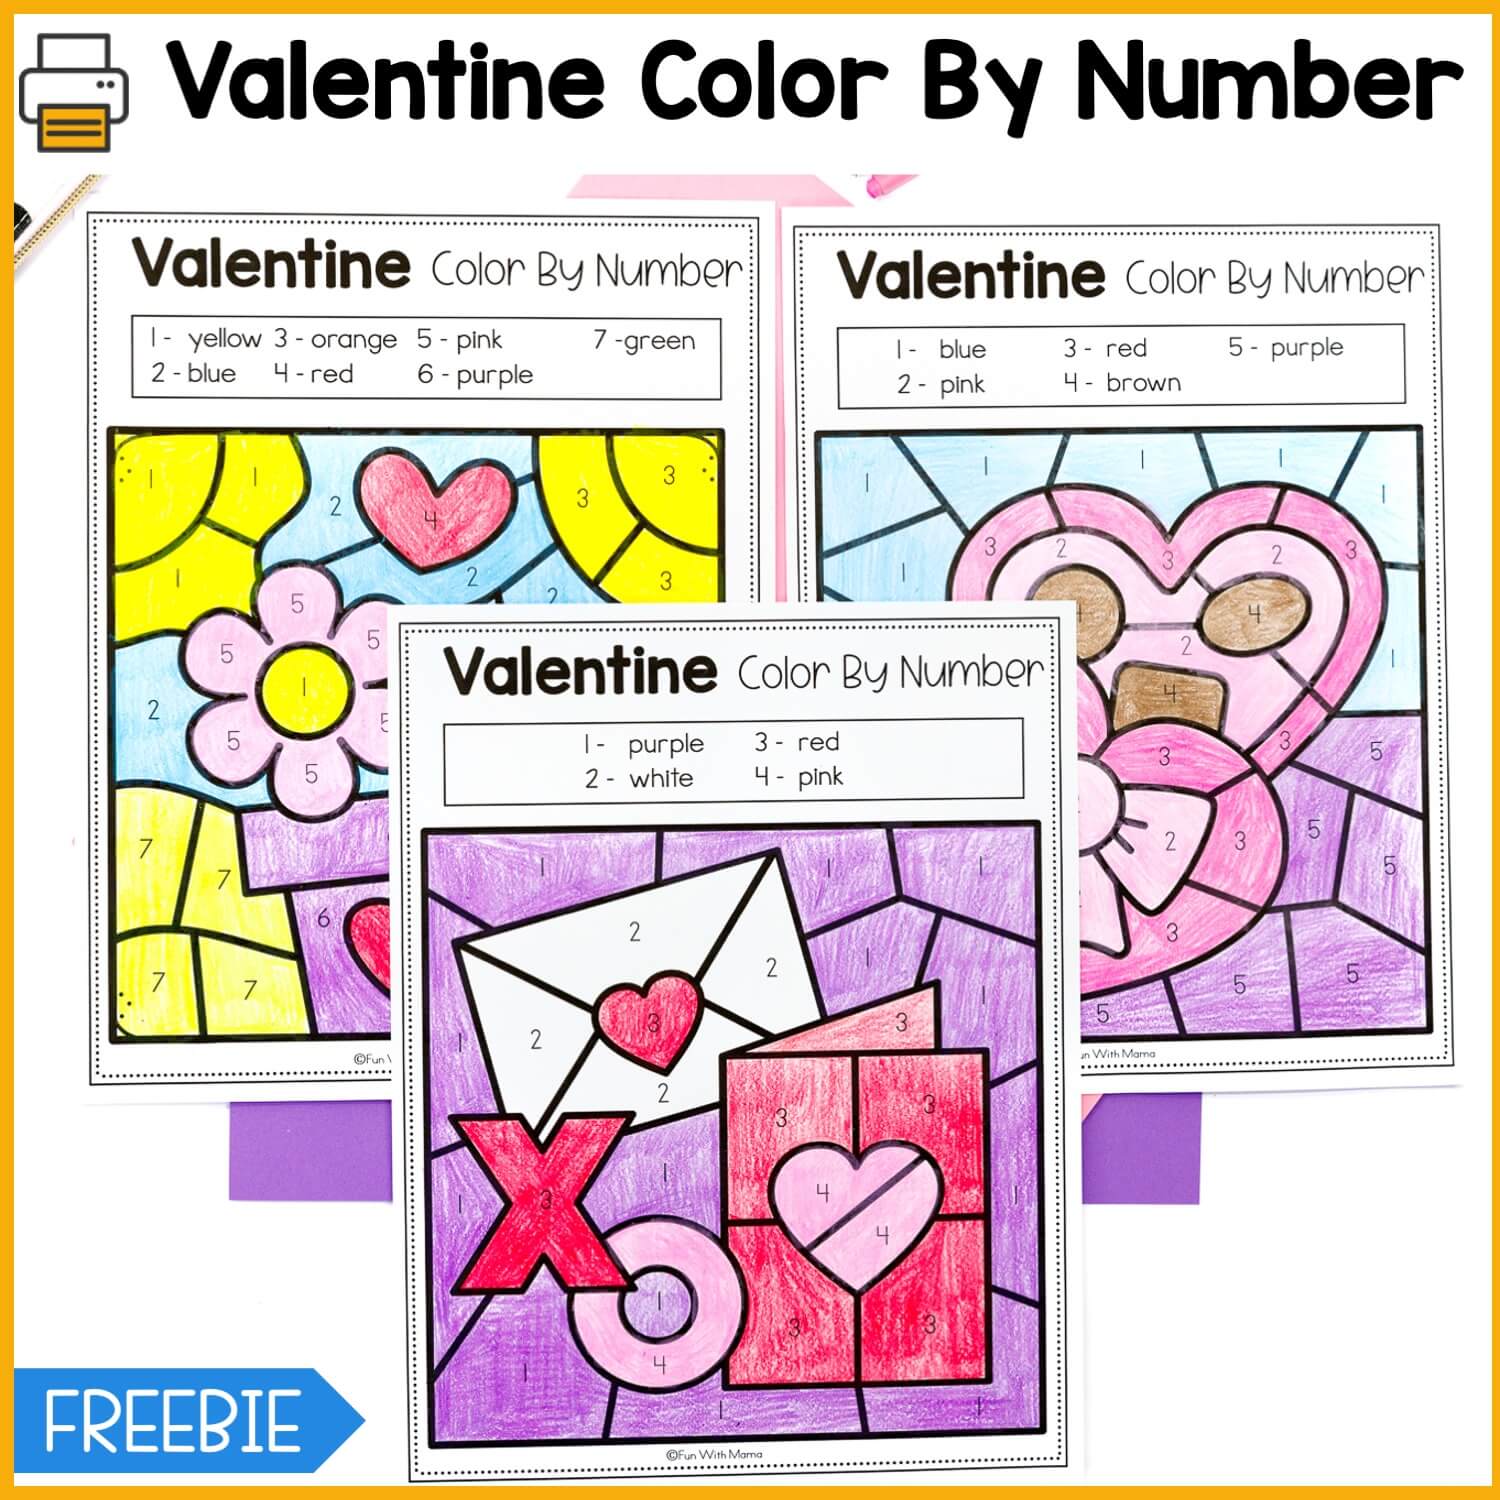 Free Valentine Color by Number